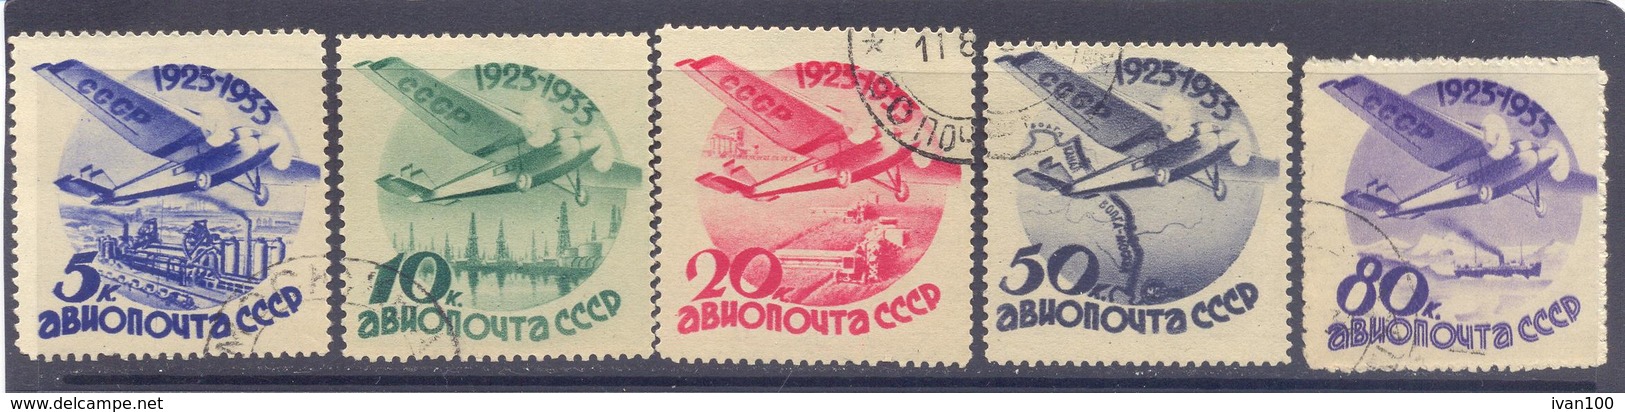 1934. USSR/Russia, 10th Anniv. Of Soviet Civil Aviation And USSR Air-mail Service, Mich.462/66v, Used - Gebruikt